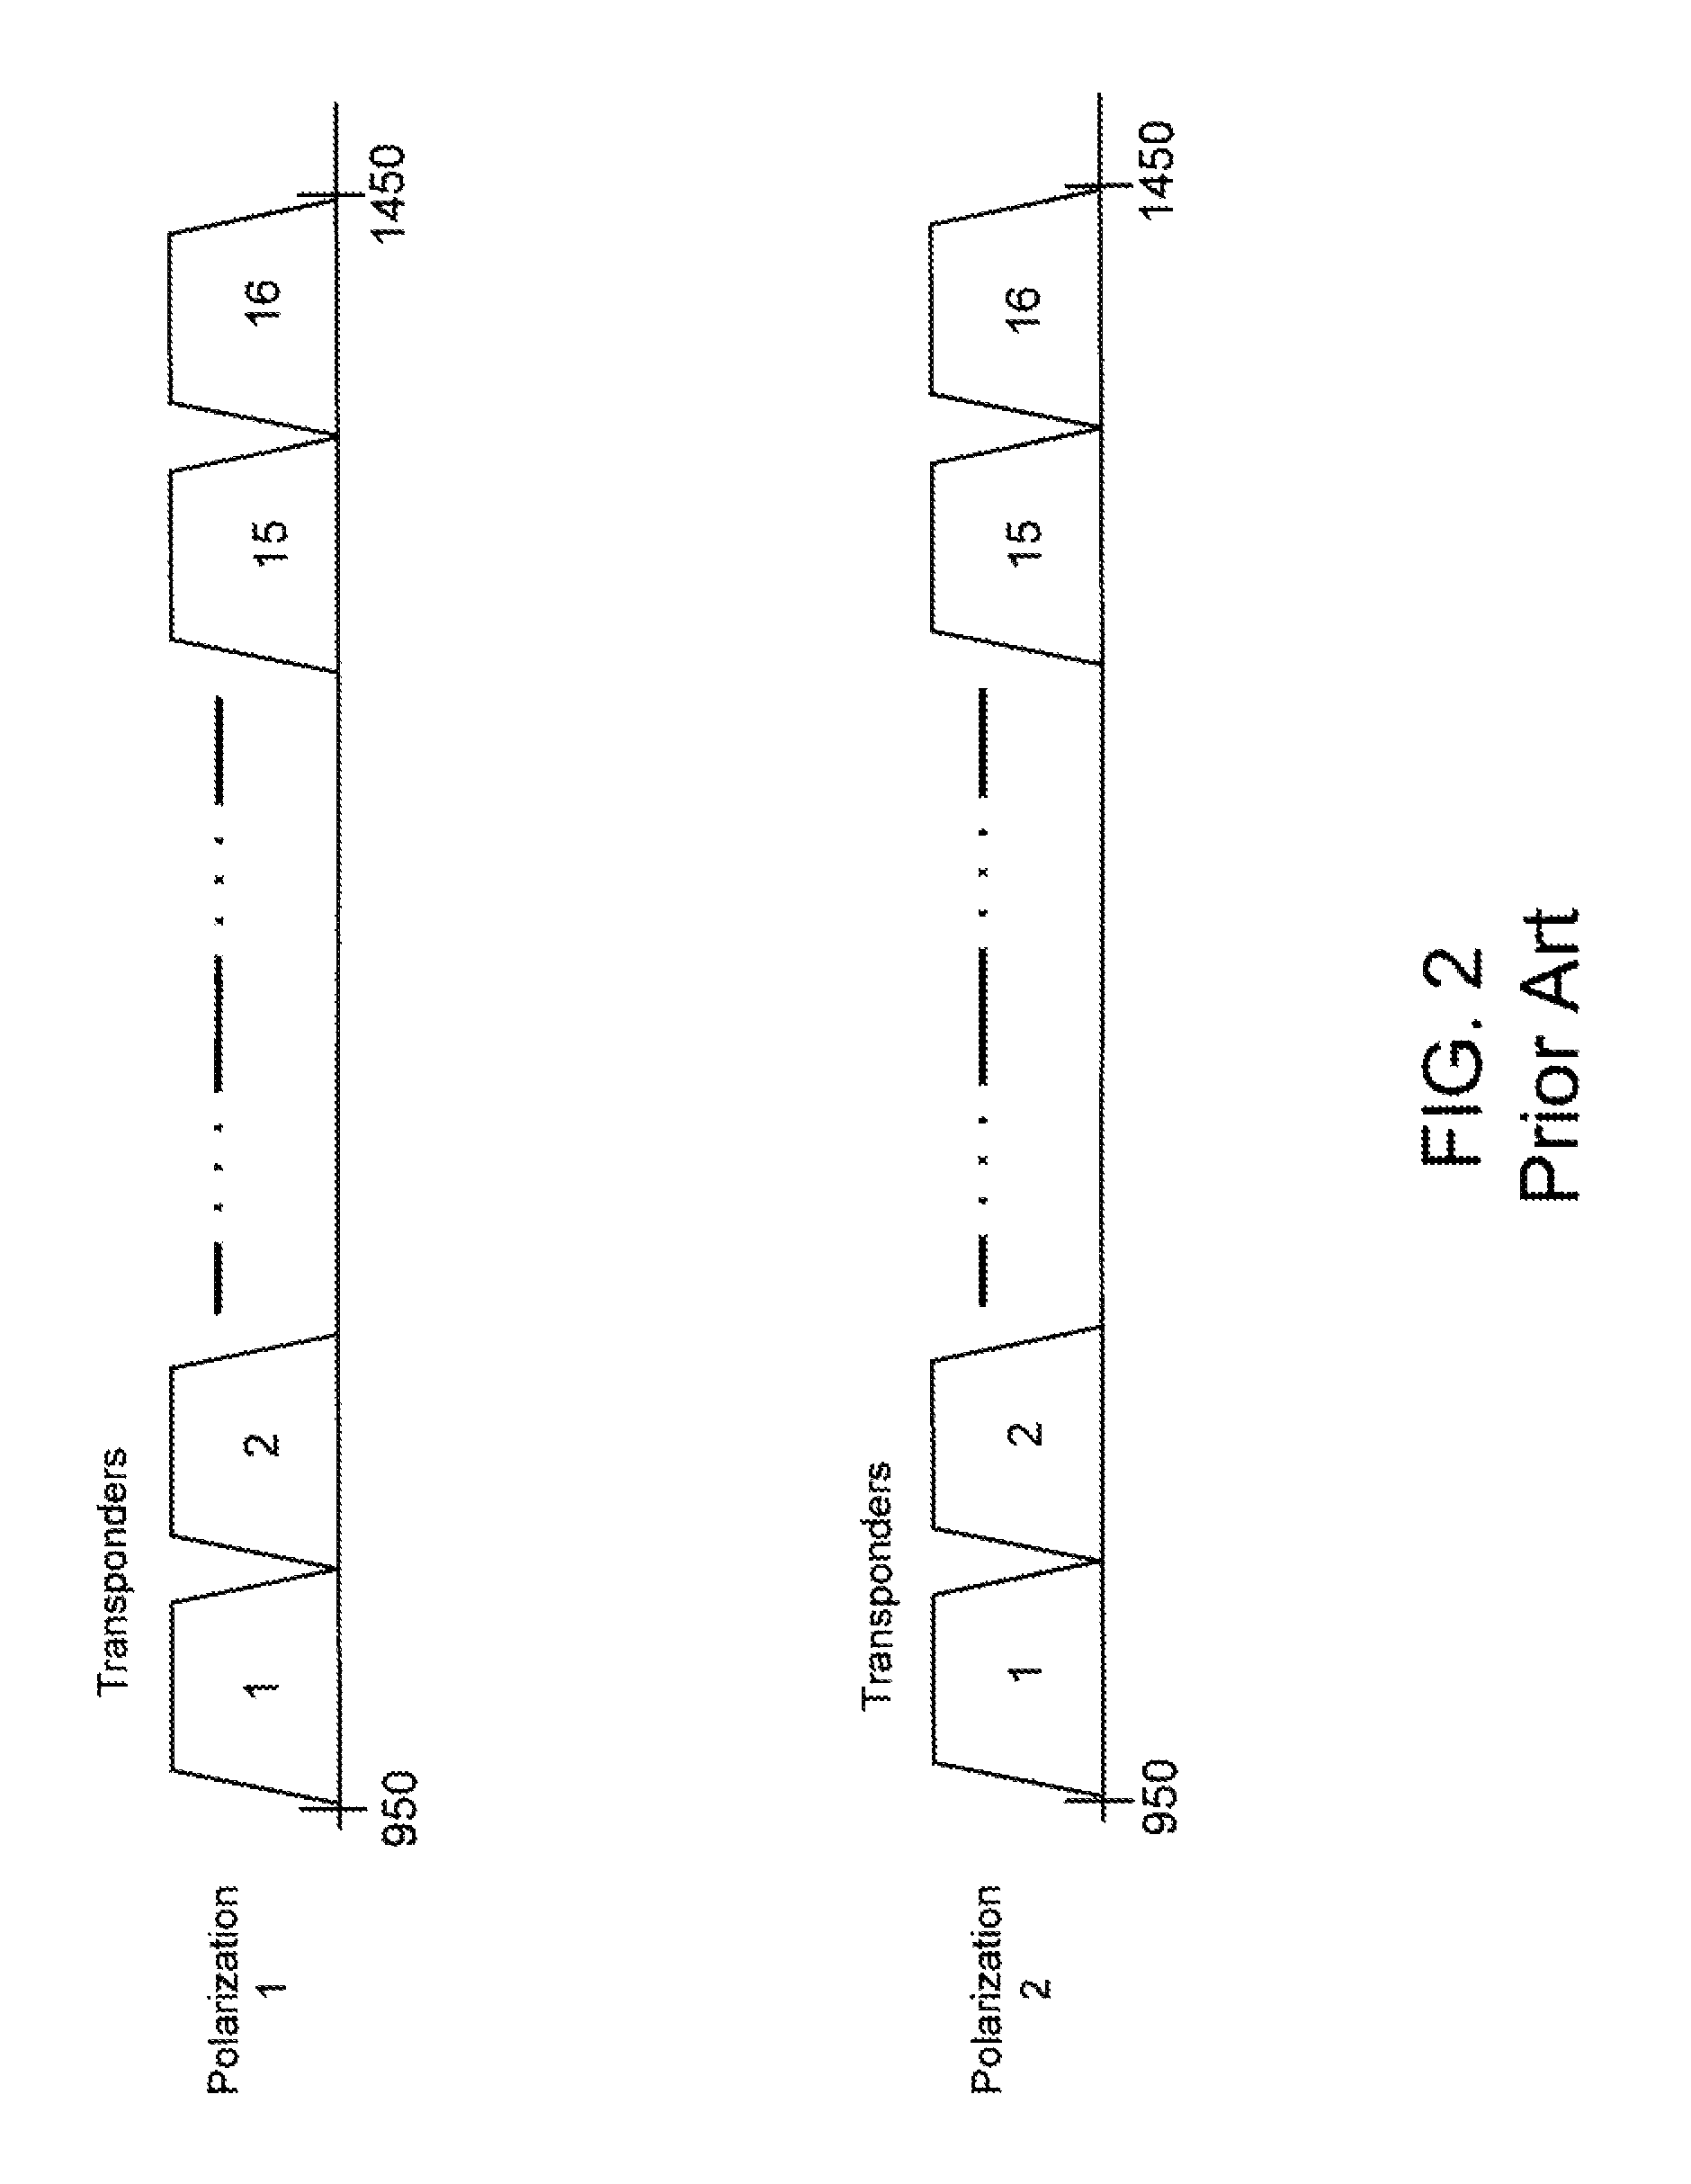 Broadband satellite system for the simultaneous reception of multiple channels using shared iterative decoder